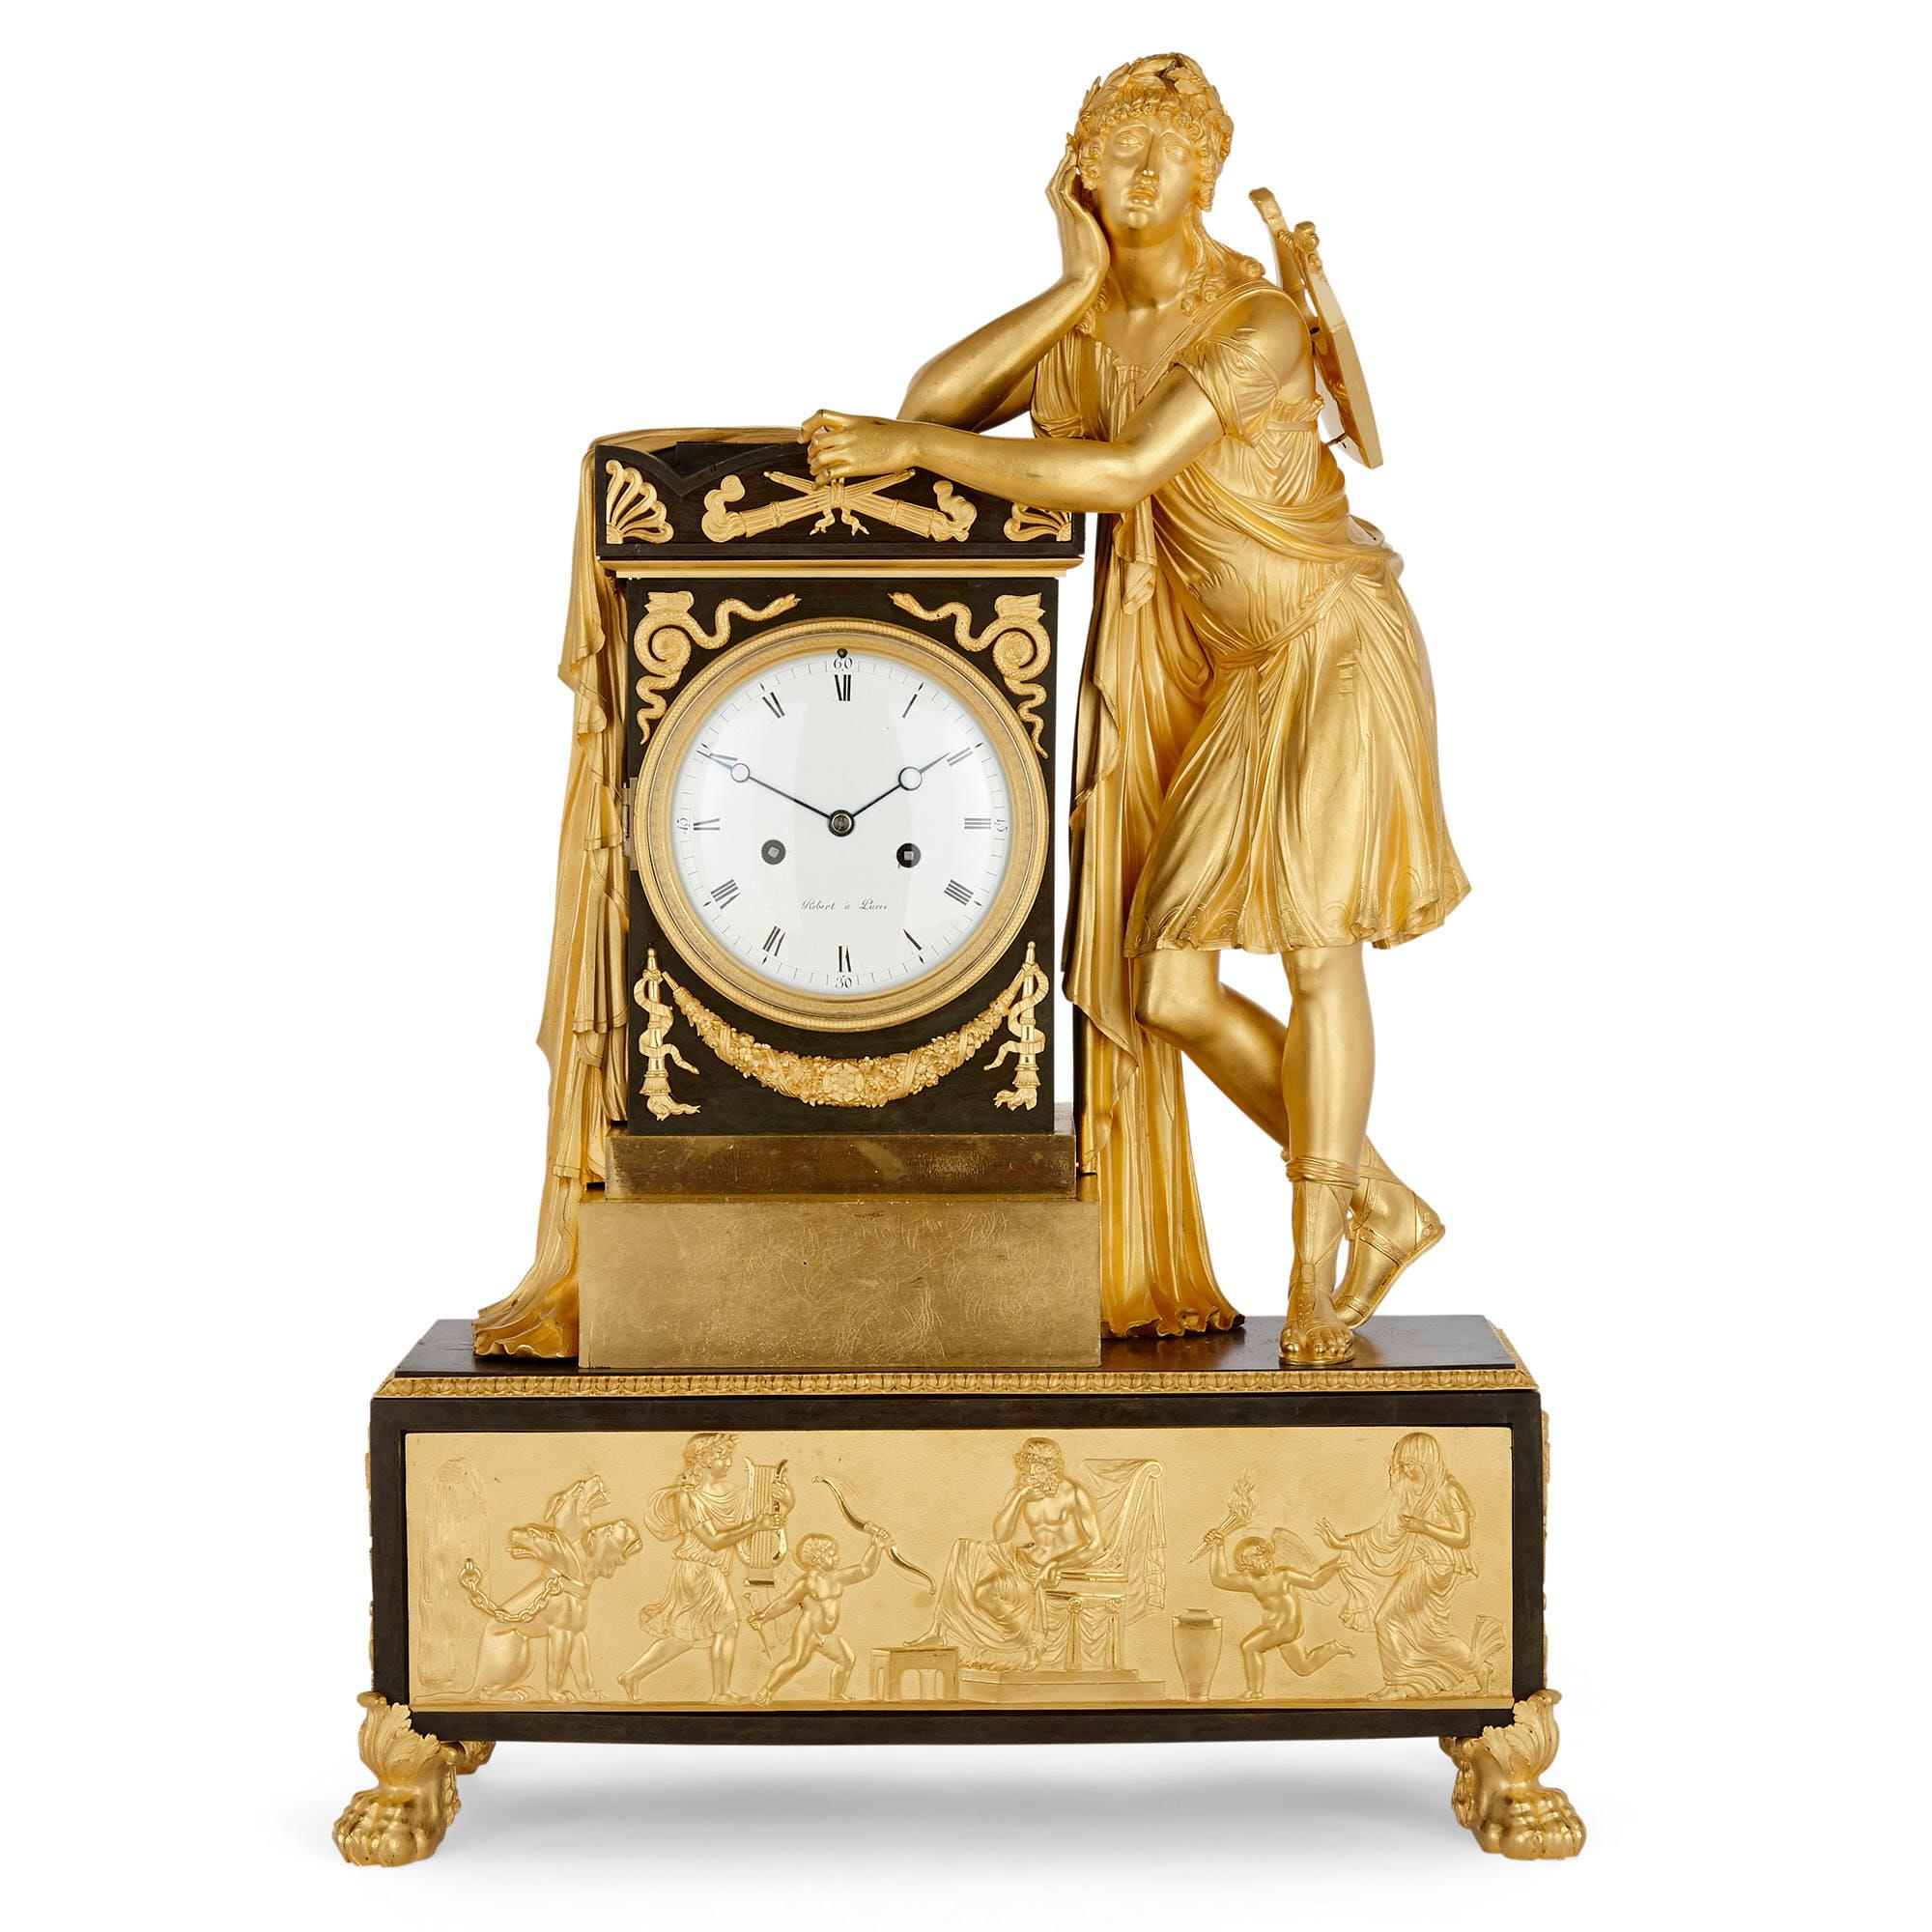 Antique Empire period neoclassical style mantel clock
French, circa 1810
Dimensions: Height 68cm, width 47cm, depth 20cm

This early 19th century French mantel clock is finely crafted from gilt and patinated bronze in the Neoclassical Empire